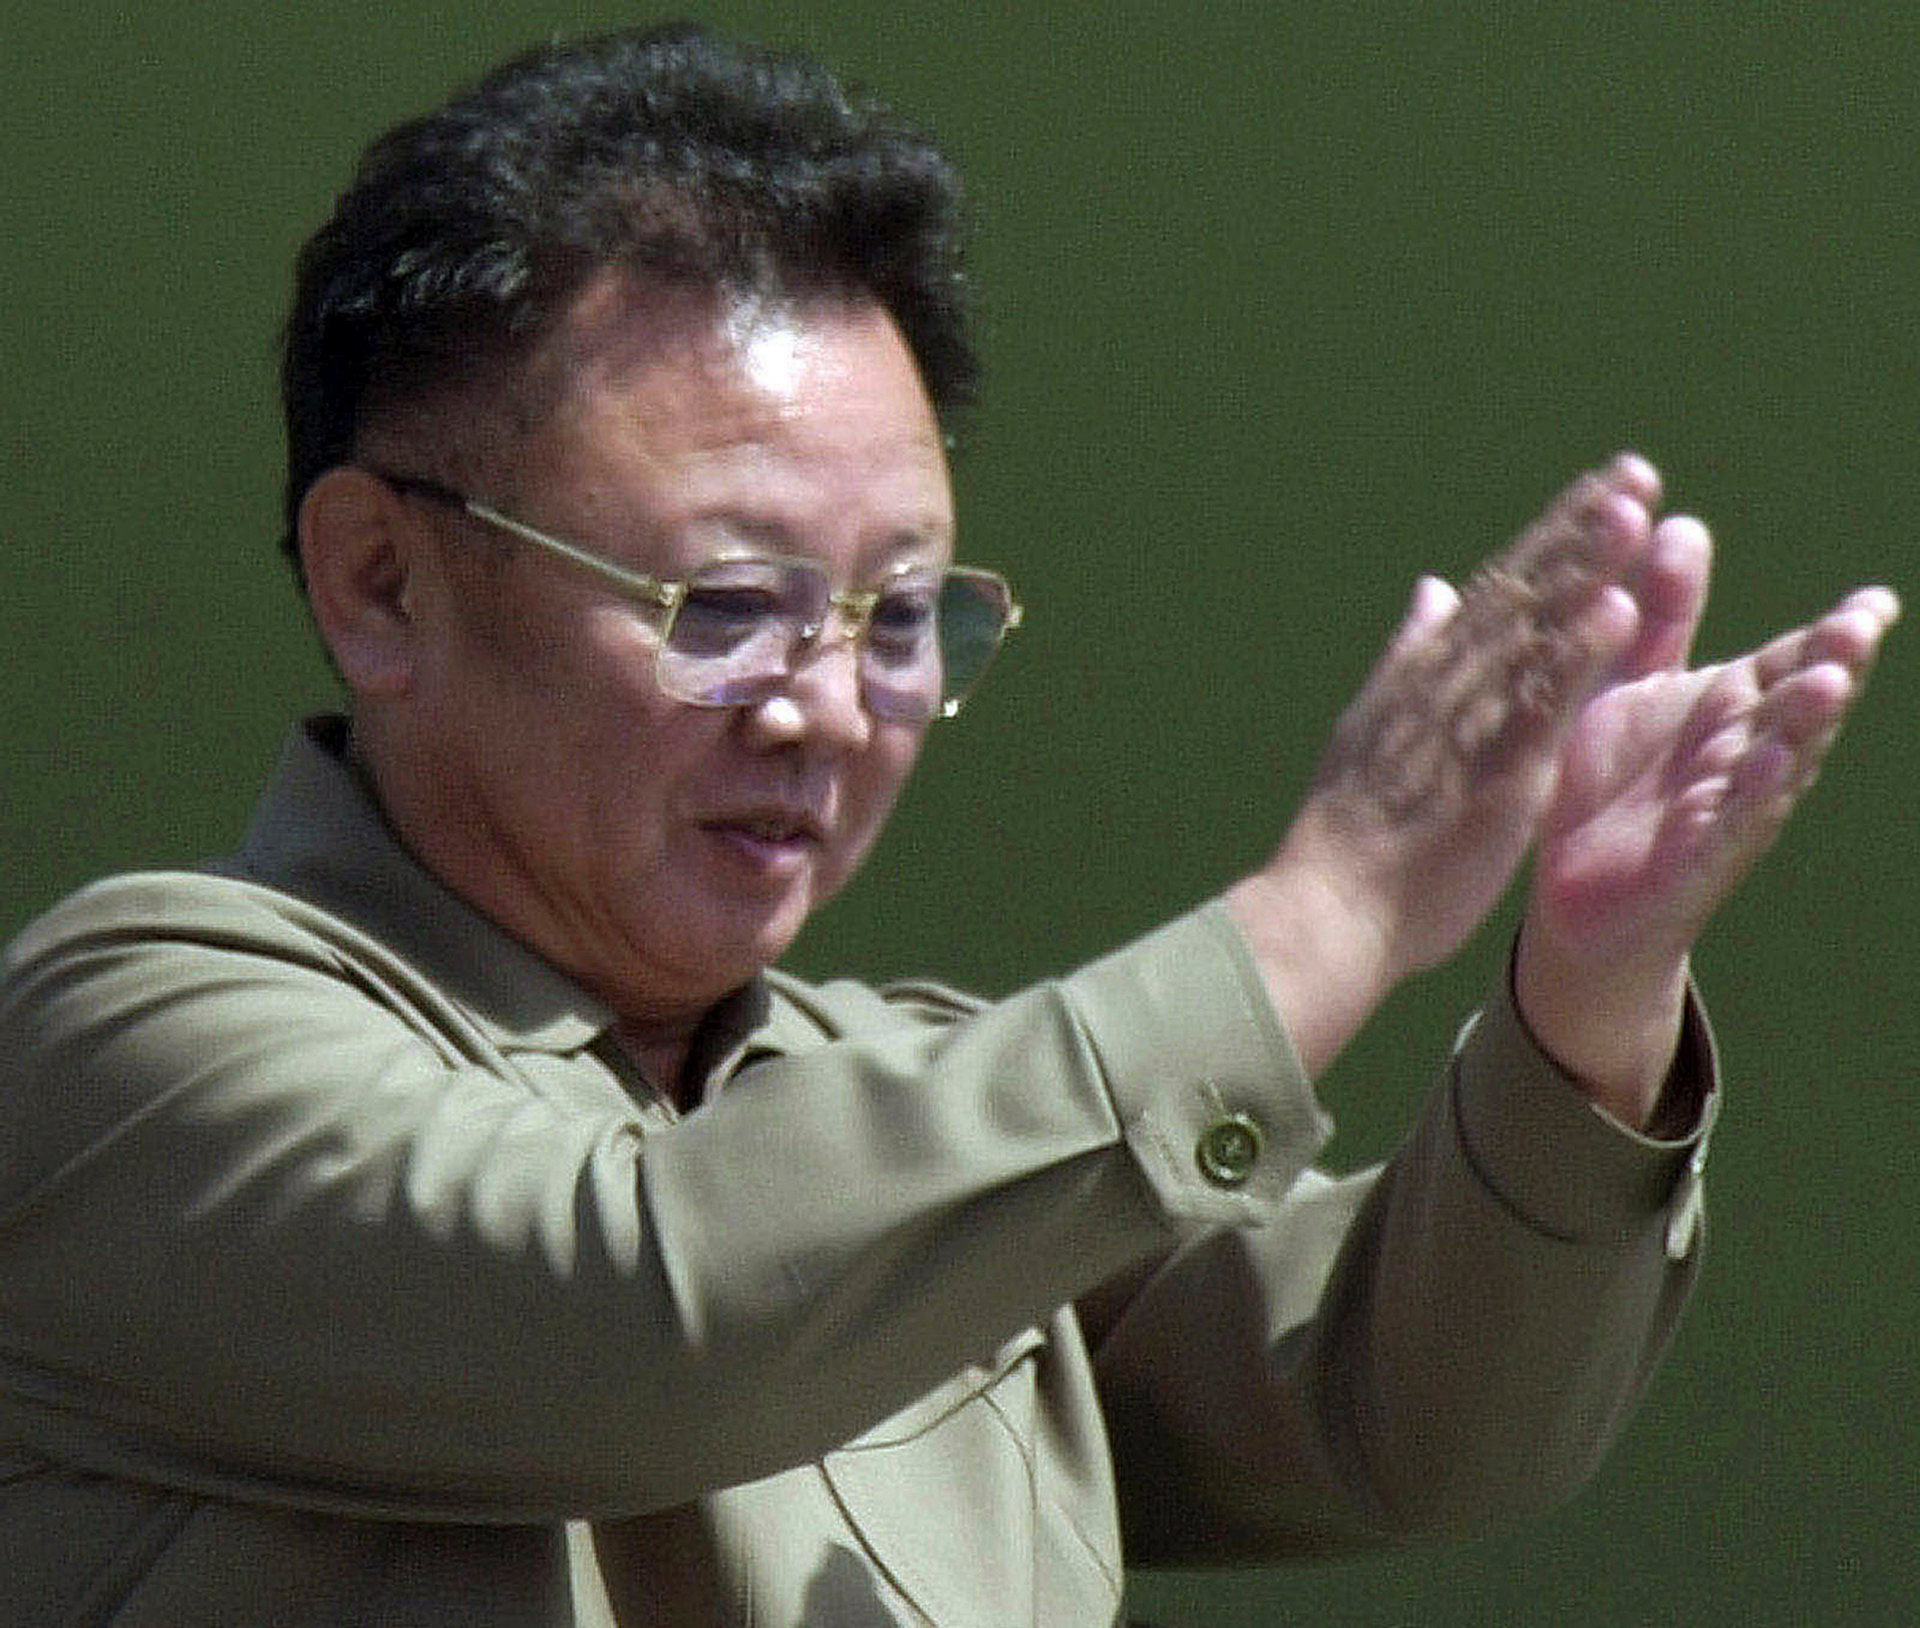 North Koreans banned from laughing, celebrating birthdays to mark anniversary of Kim Jong Il's death